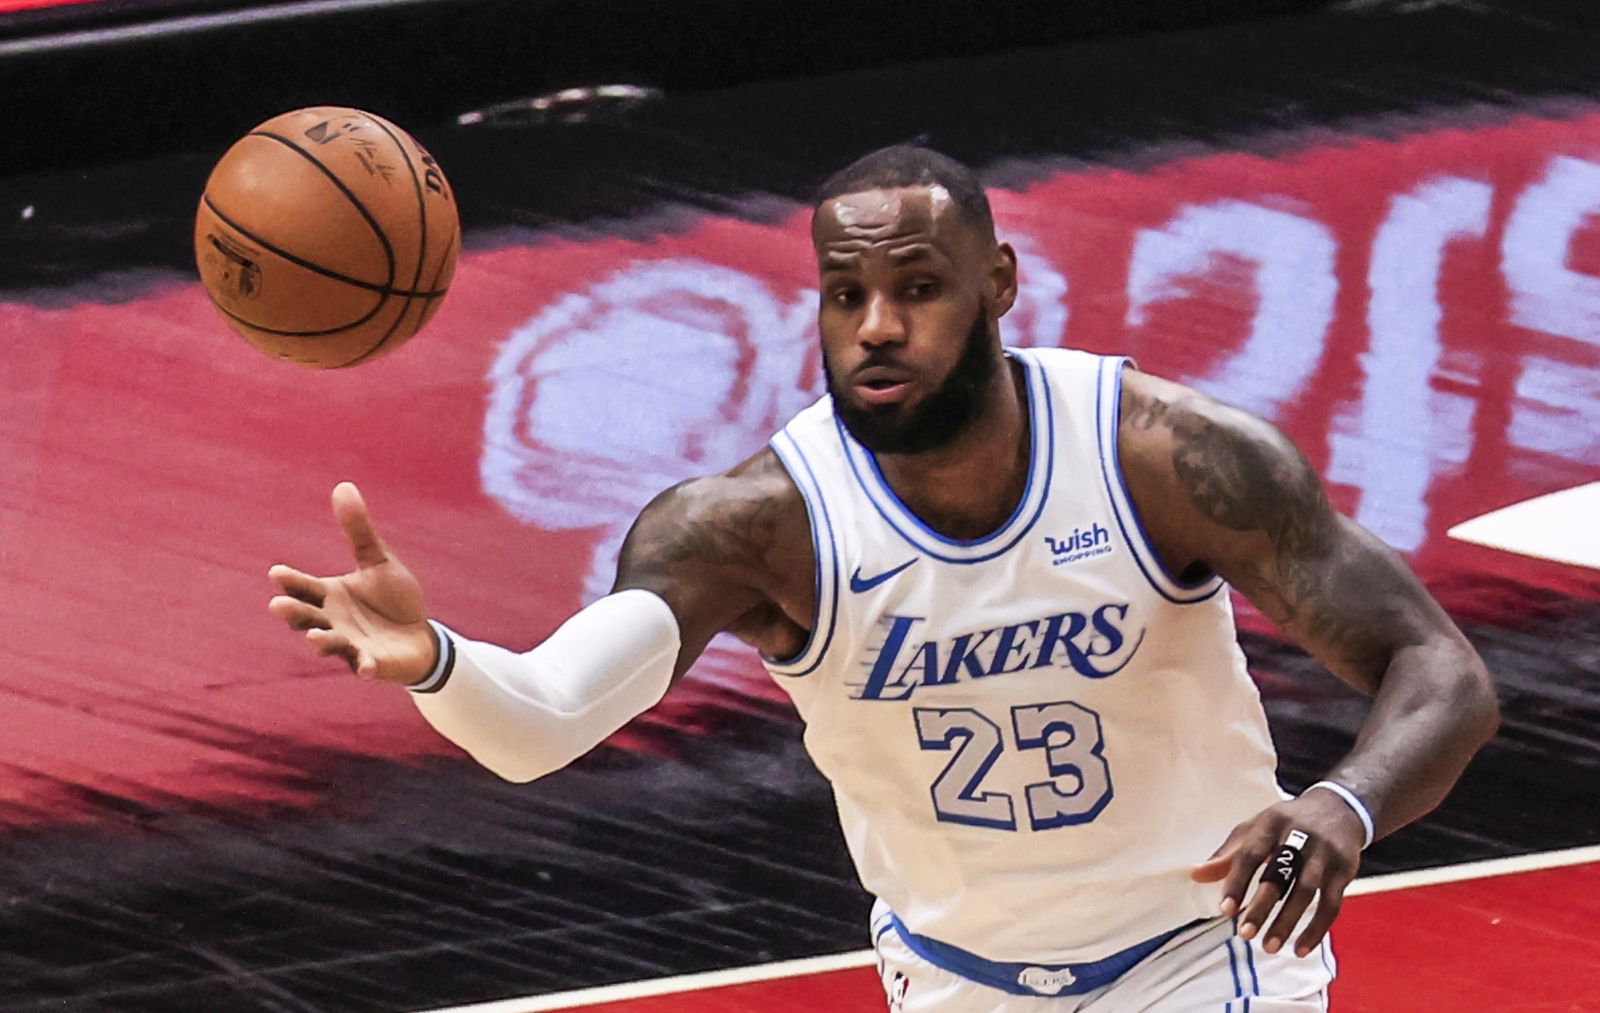 epa08961474 Los Angeles Lakers forward LeBron James reaches for a loose ball during the NBA basketball game between the Los Angeles Lakers and the Chicago Bulls at the United Center in Chicago, Illinois, USA, 23 January 2021.  EPA/TANNEN MAURY SHUTTERSTOCK OUT